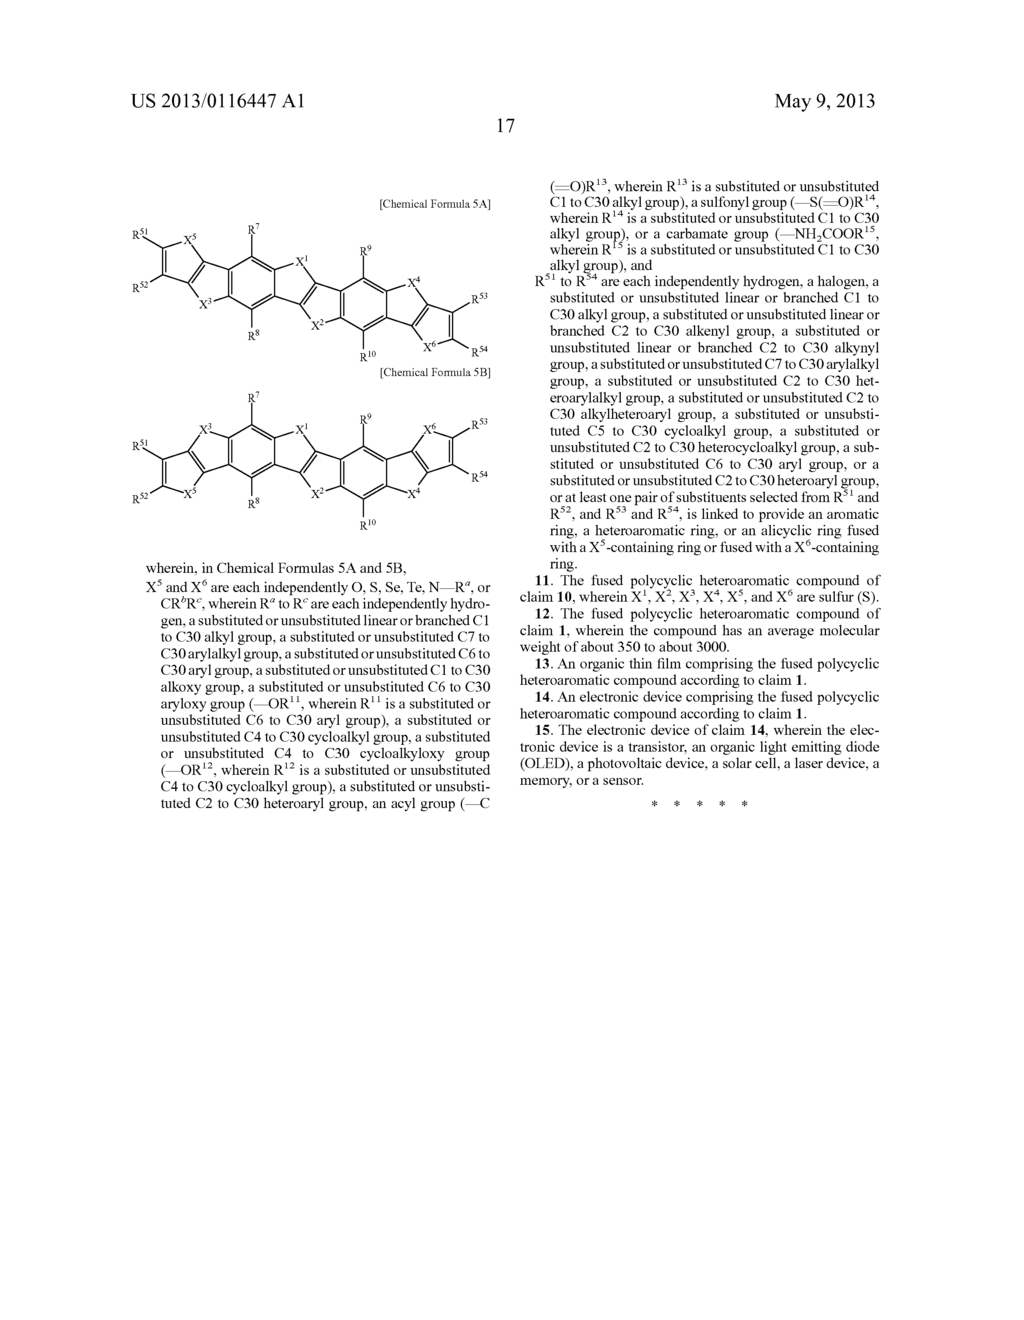 FUSED POLYHETEROAROMATIC COMPOUND, ORGANIC THIN FILM INCLUDING THE     COMPOUND, AND ELECTRONIC DEVICE INCLUDING THE ORGANIC THIN FILM - diagram, schematic, and image 20